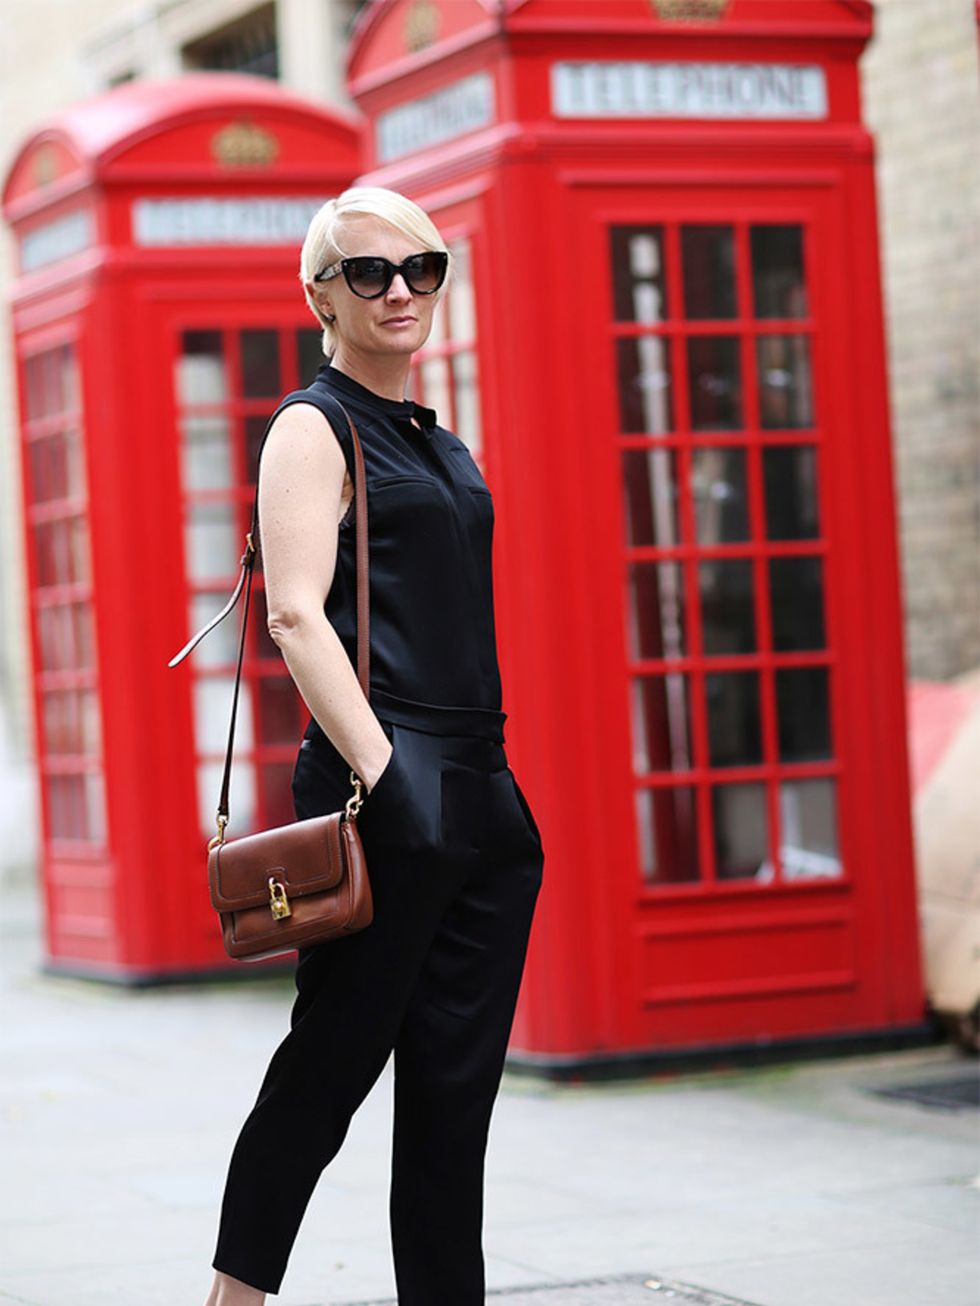 <p>Lorraine Candy - Editor in Chief</p>

<p>Dolce & Gabbana bag, AllSaints jumpsuit, Prada glasses, Office trainers.</p>